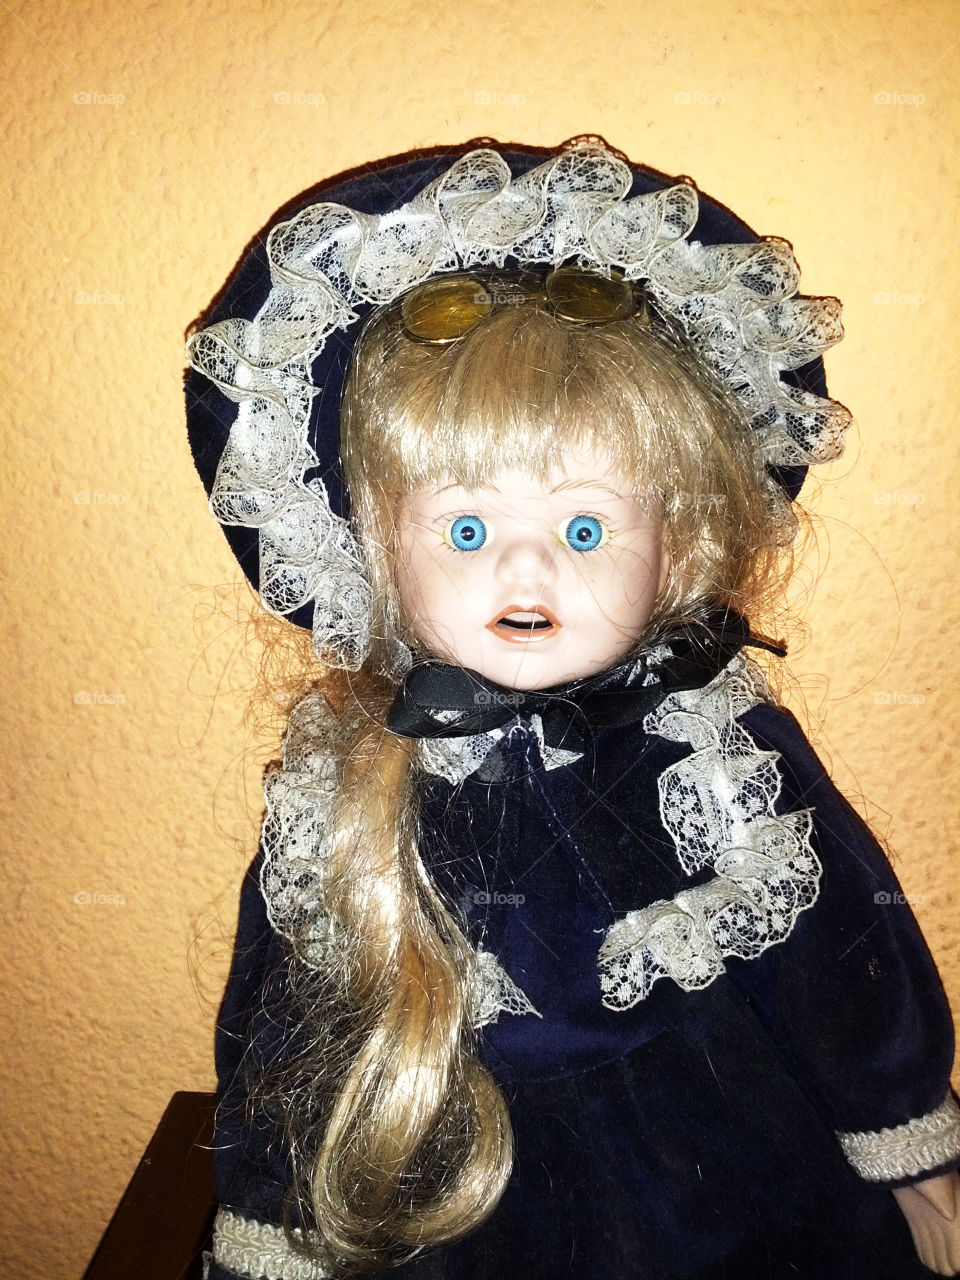 Scary doll